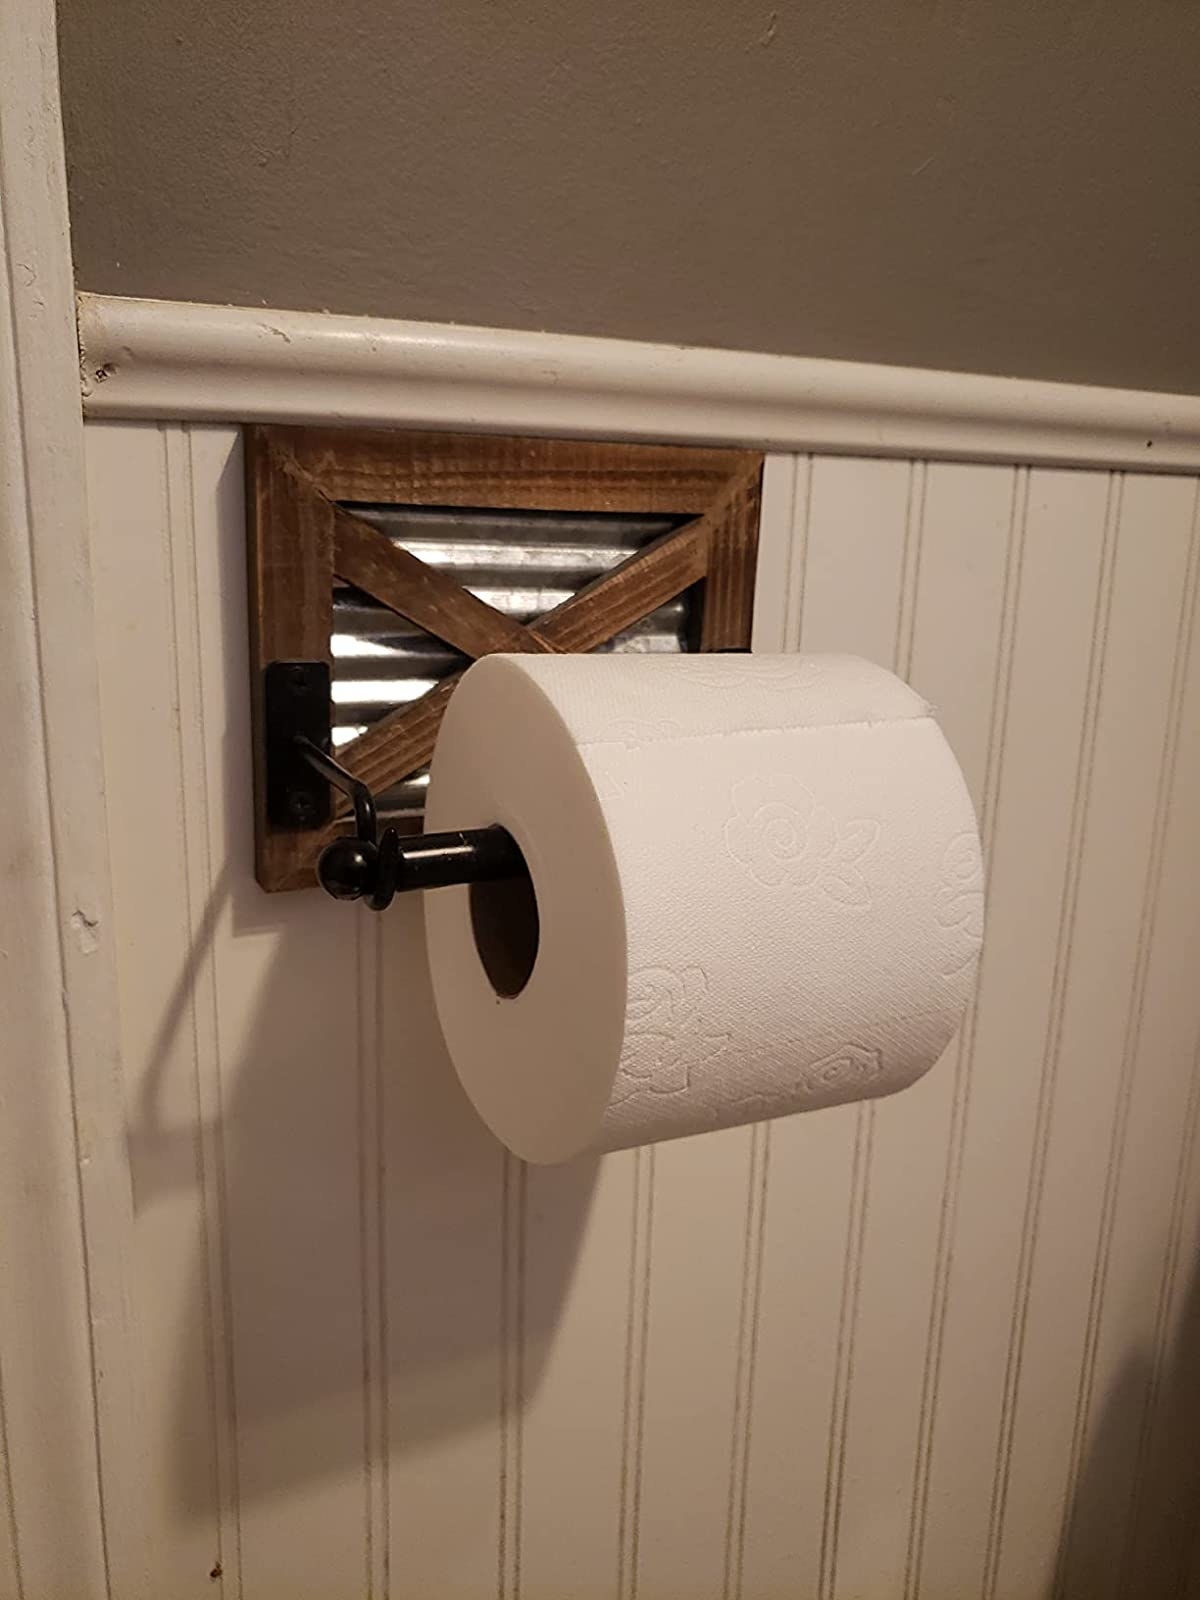 reviewer image of the toilet paper holder mounted to a bathroom wall